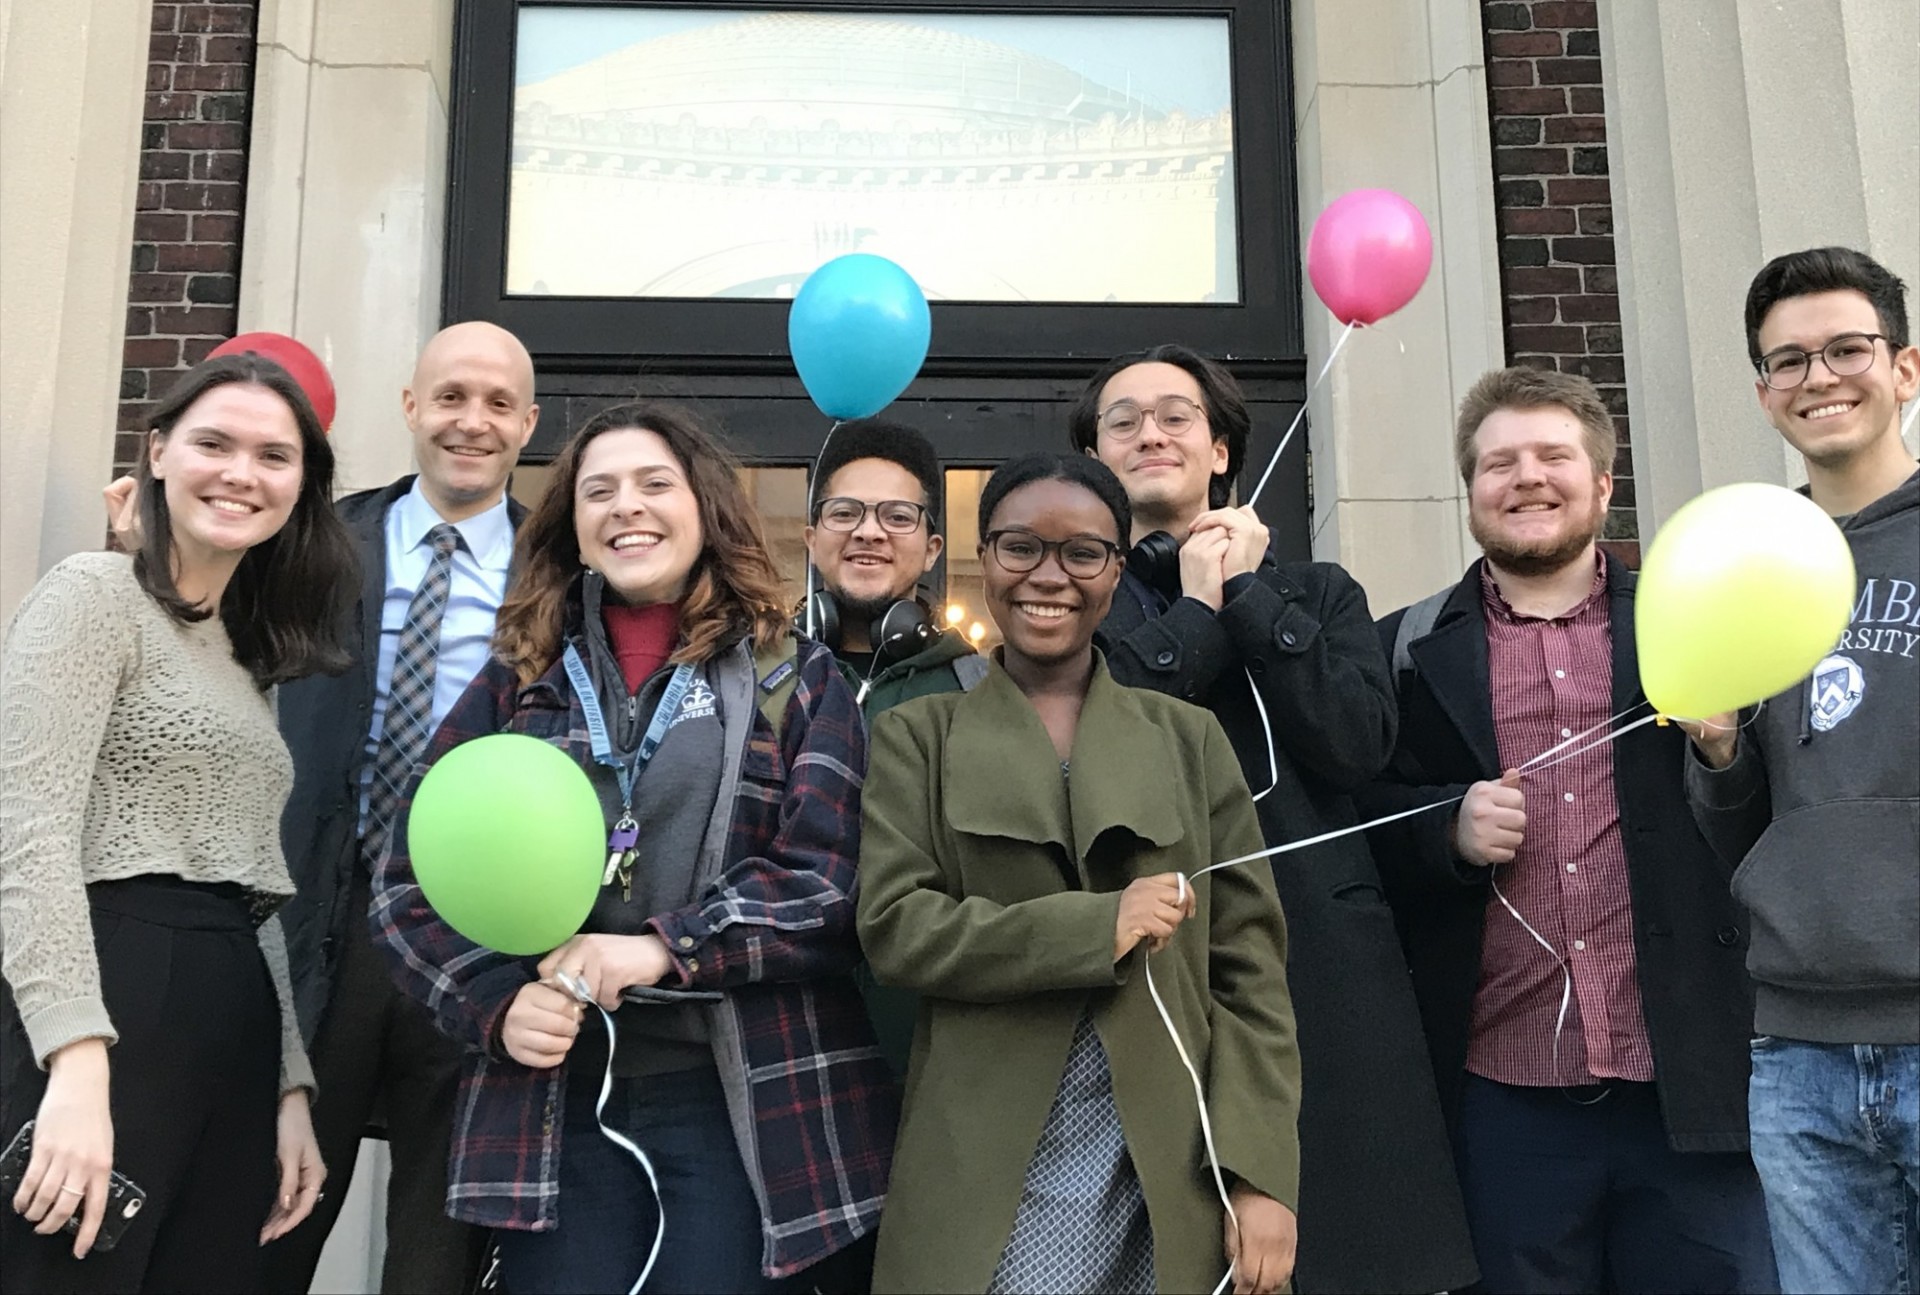 Programming Team of the Earl Hall Center with colorful balloons!